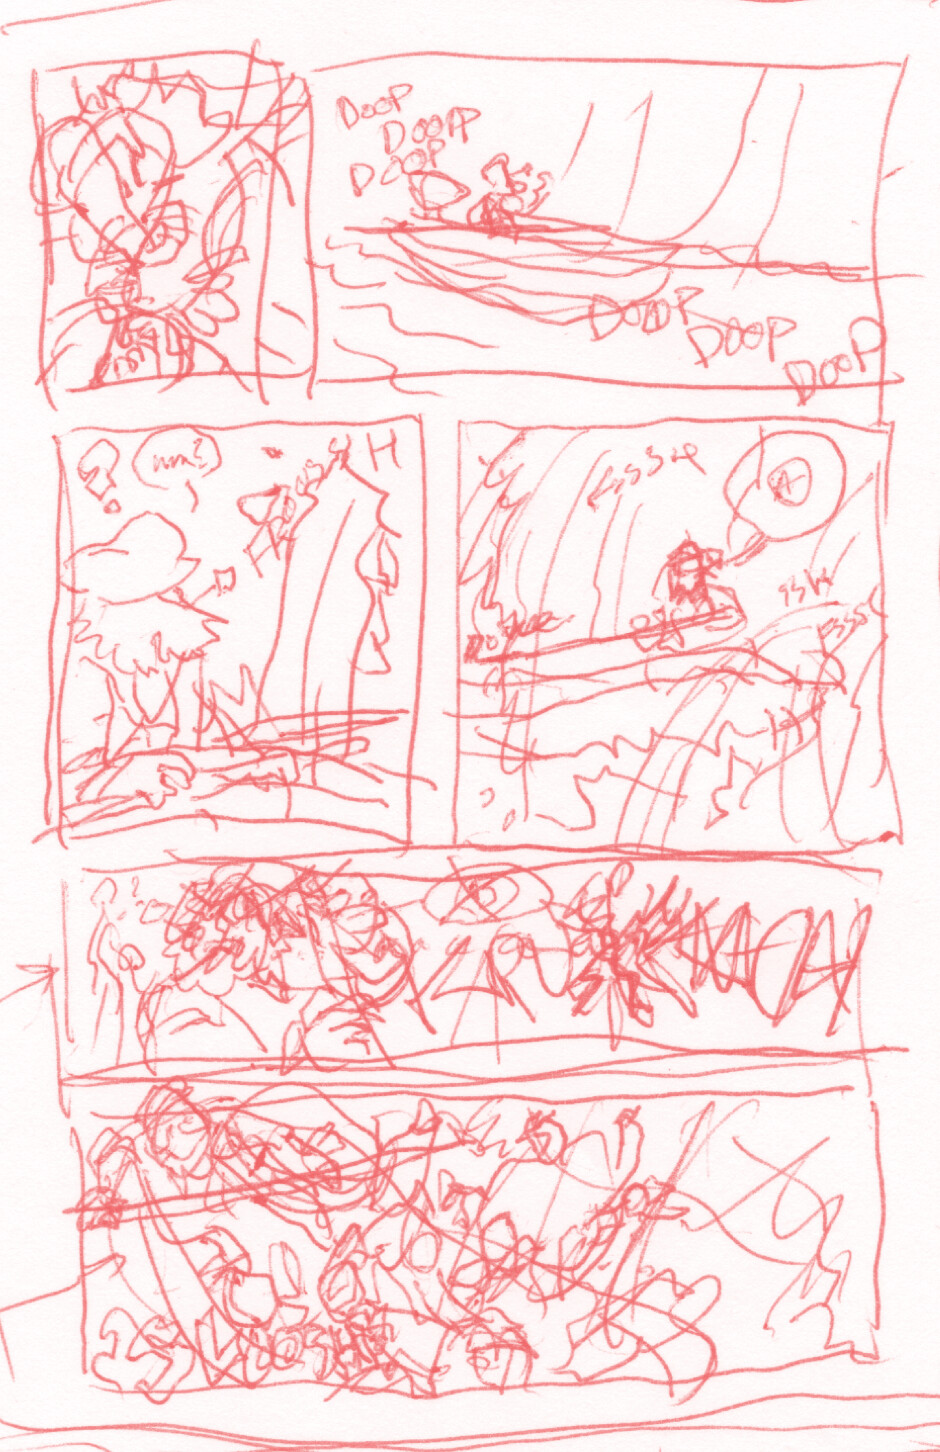 page 39 thumbnail - these were done on paper beforehand and scanned in--the letter markings indicate the lines on the page (next to the thumb) that are supposed to go in the text box